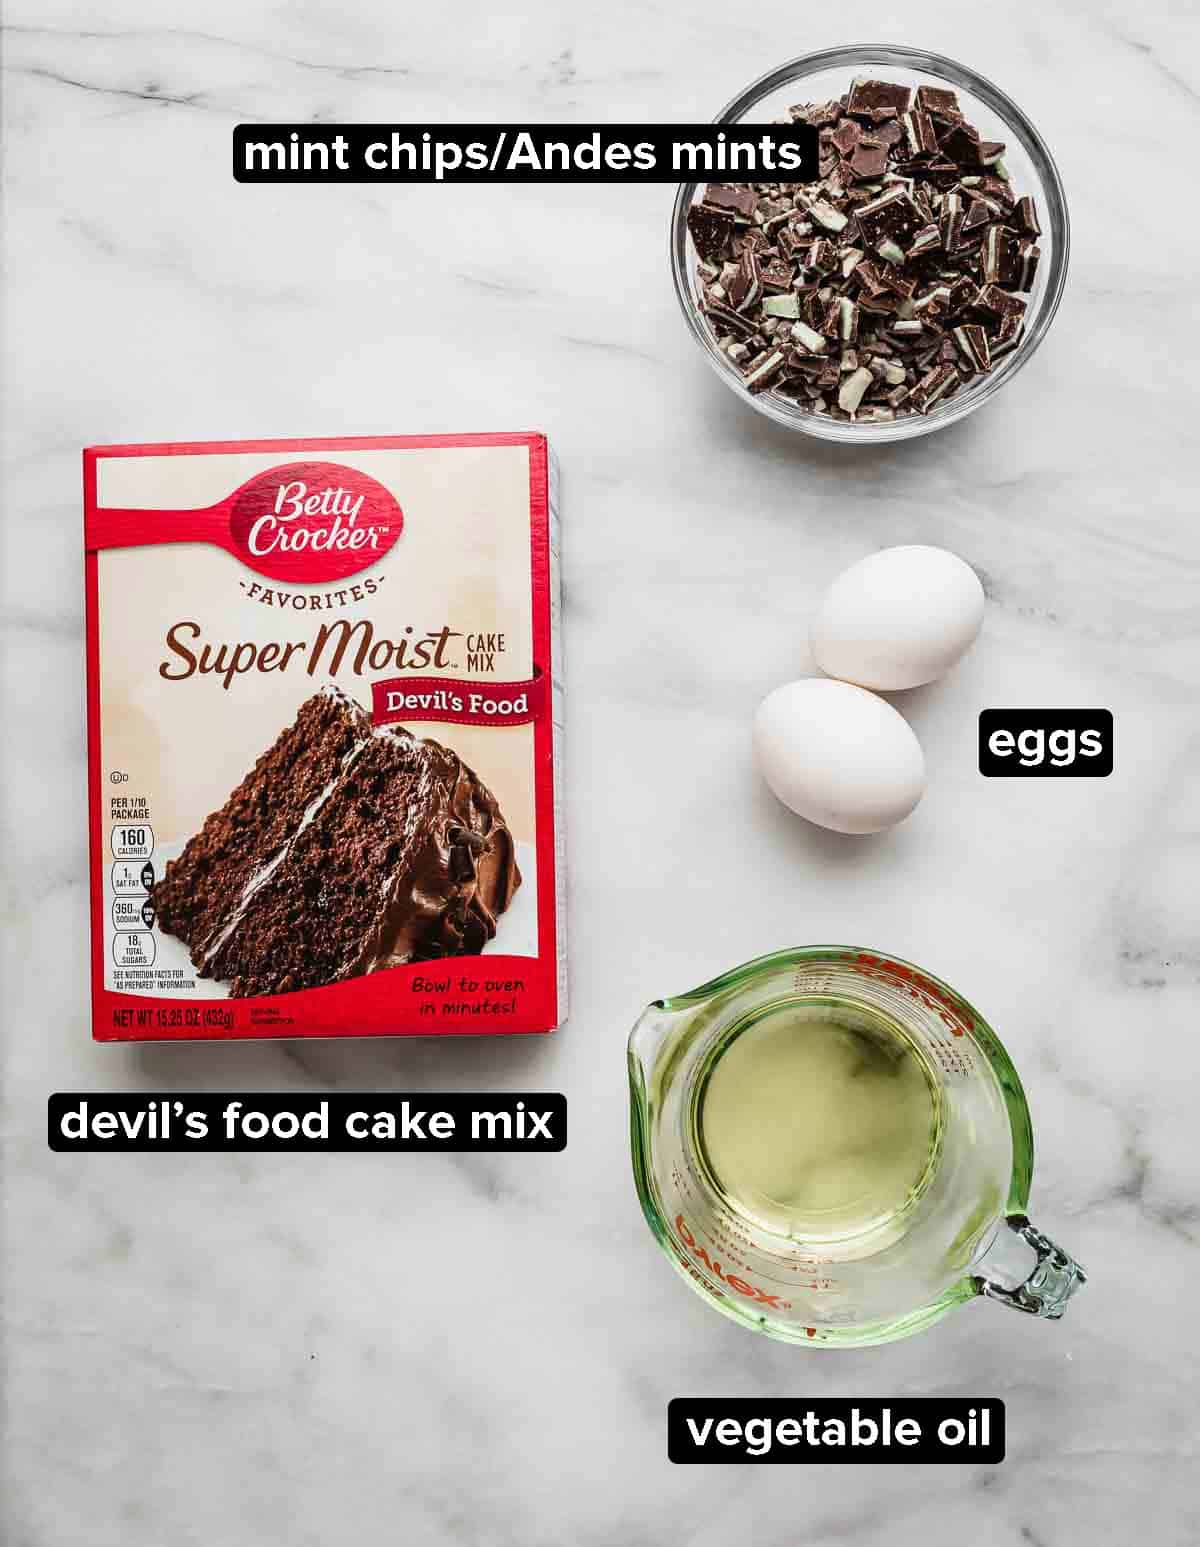 Devil's Food Cake Mix Cookies ingredients on a white background: Andes mints, cake mix, oil, and two eggs.